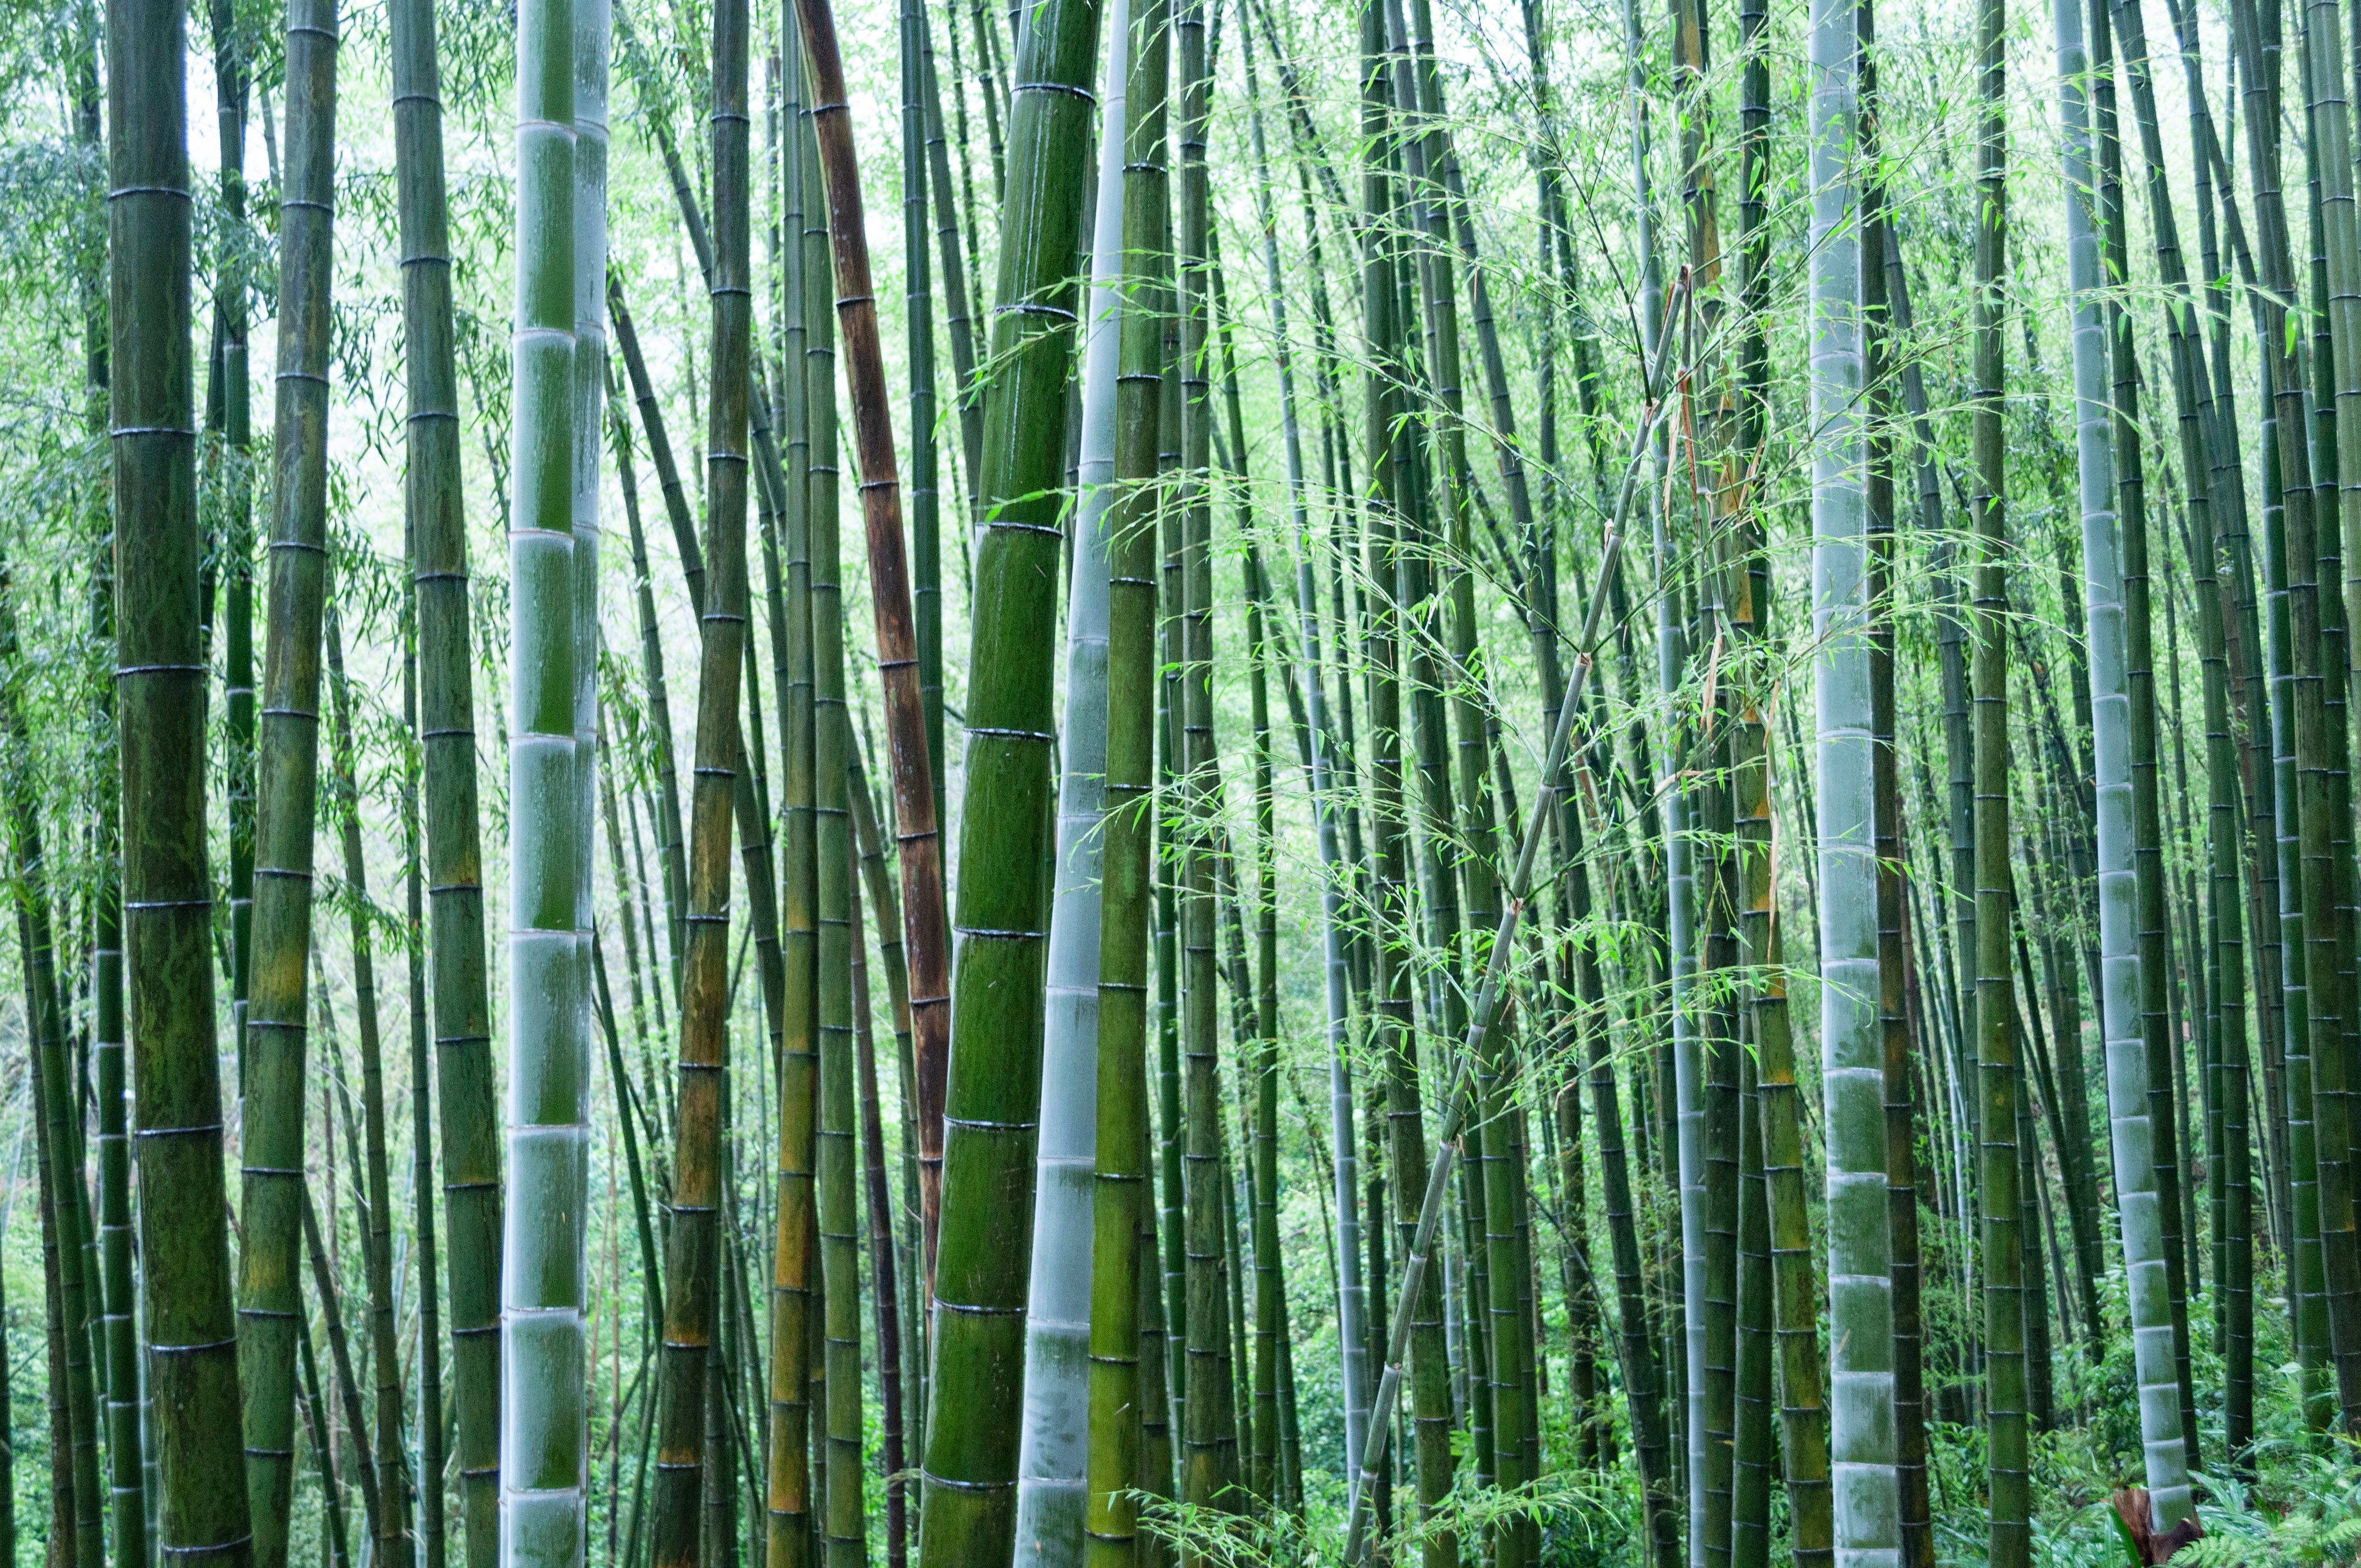 Thick grove of bamboo stalks in a bamboo forest. 